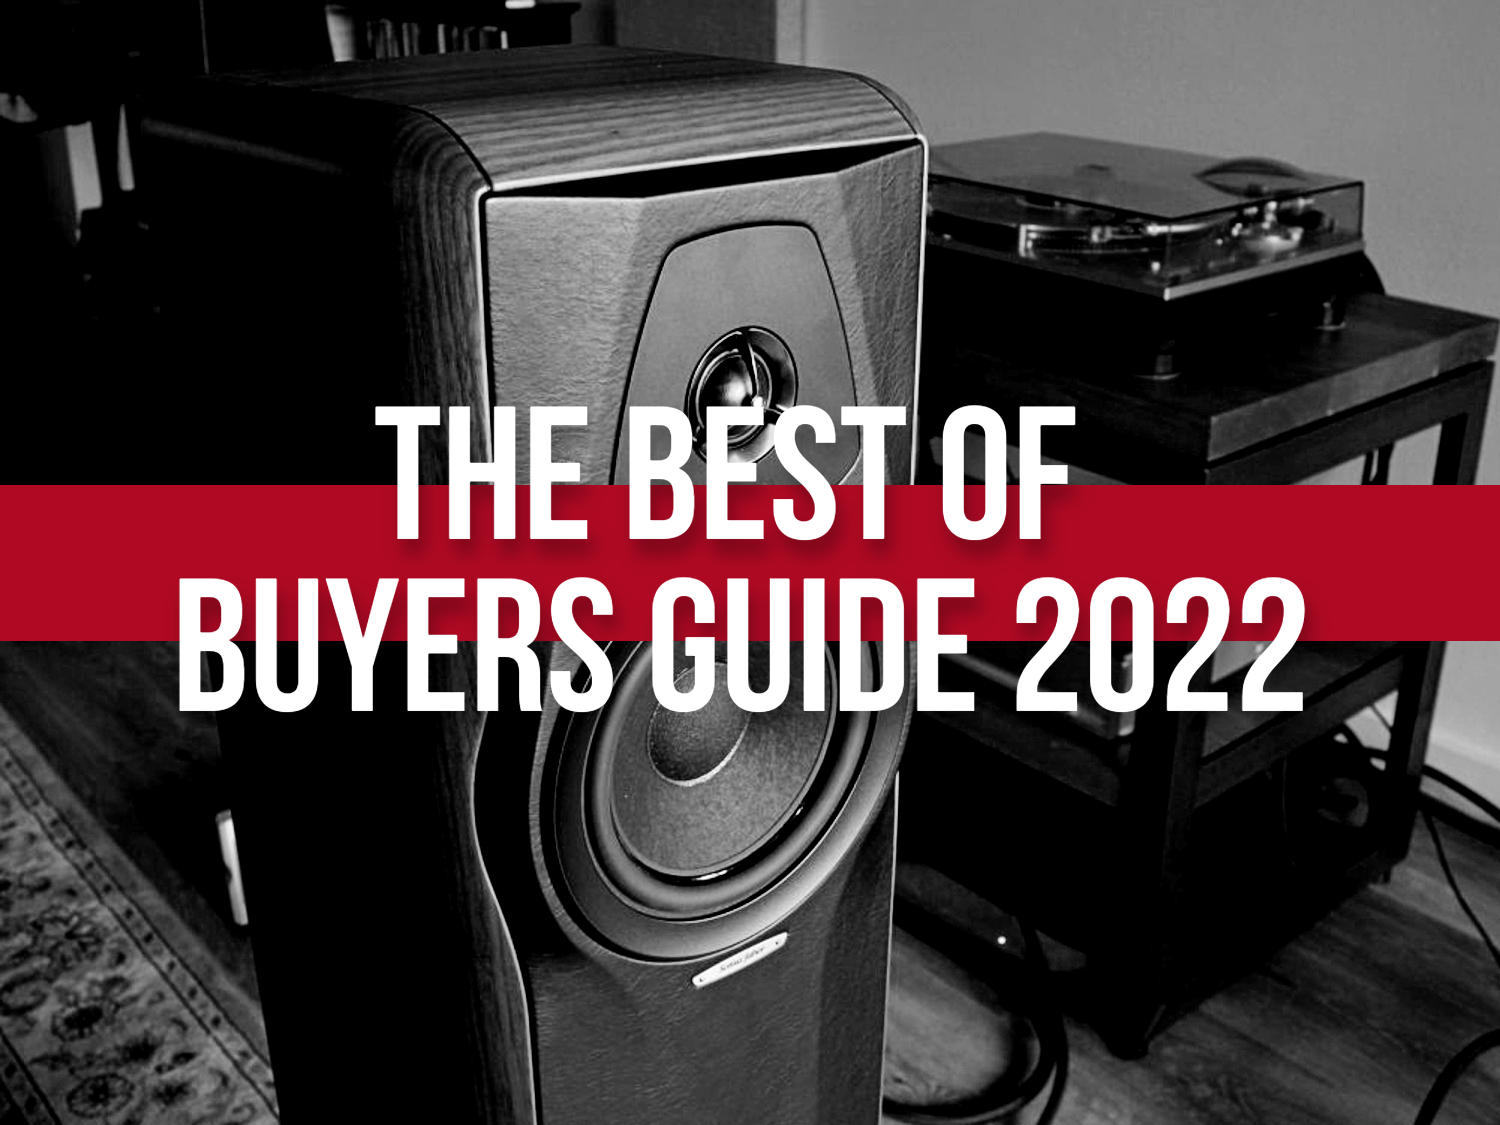 Buyers Guide 2022